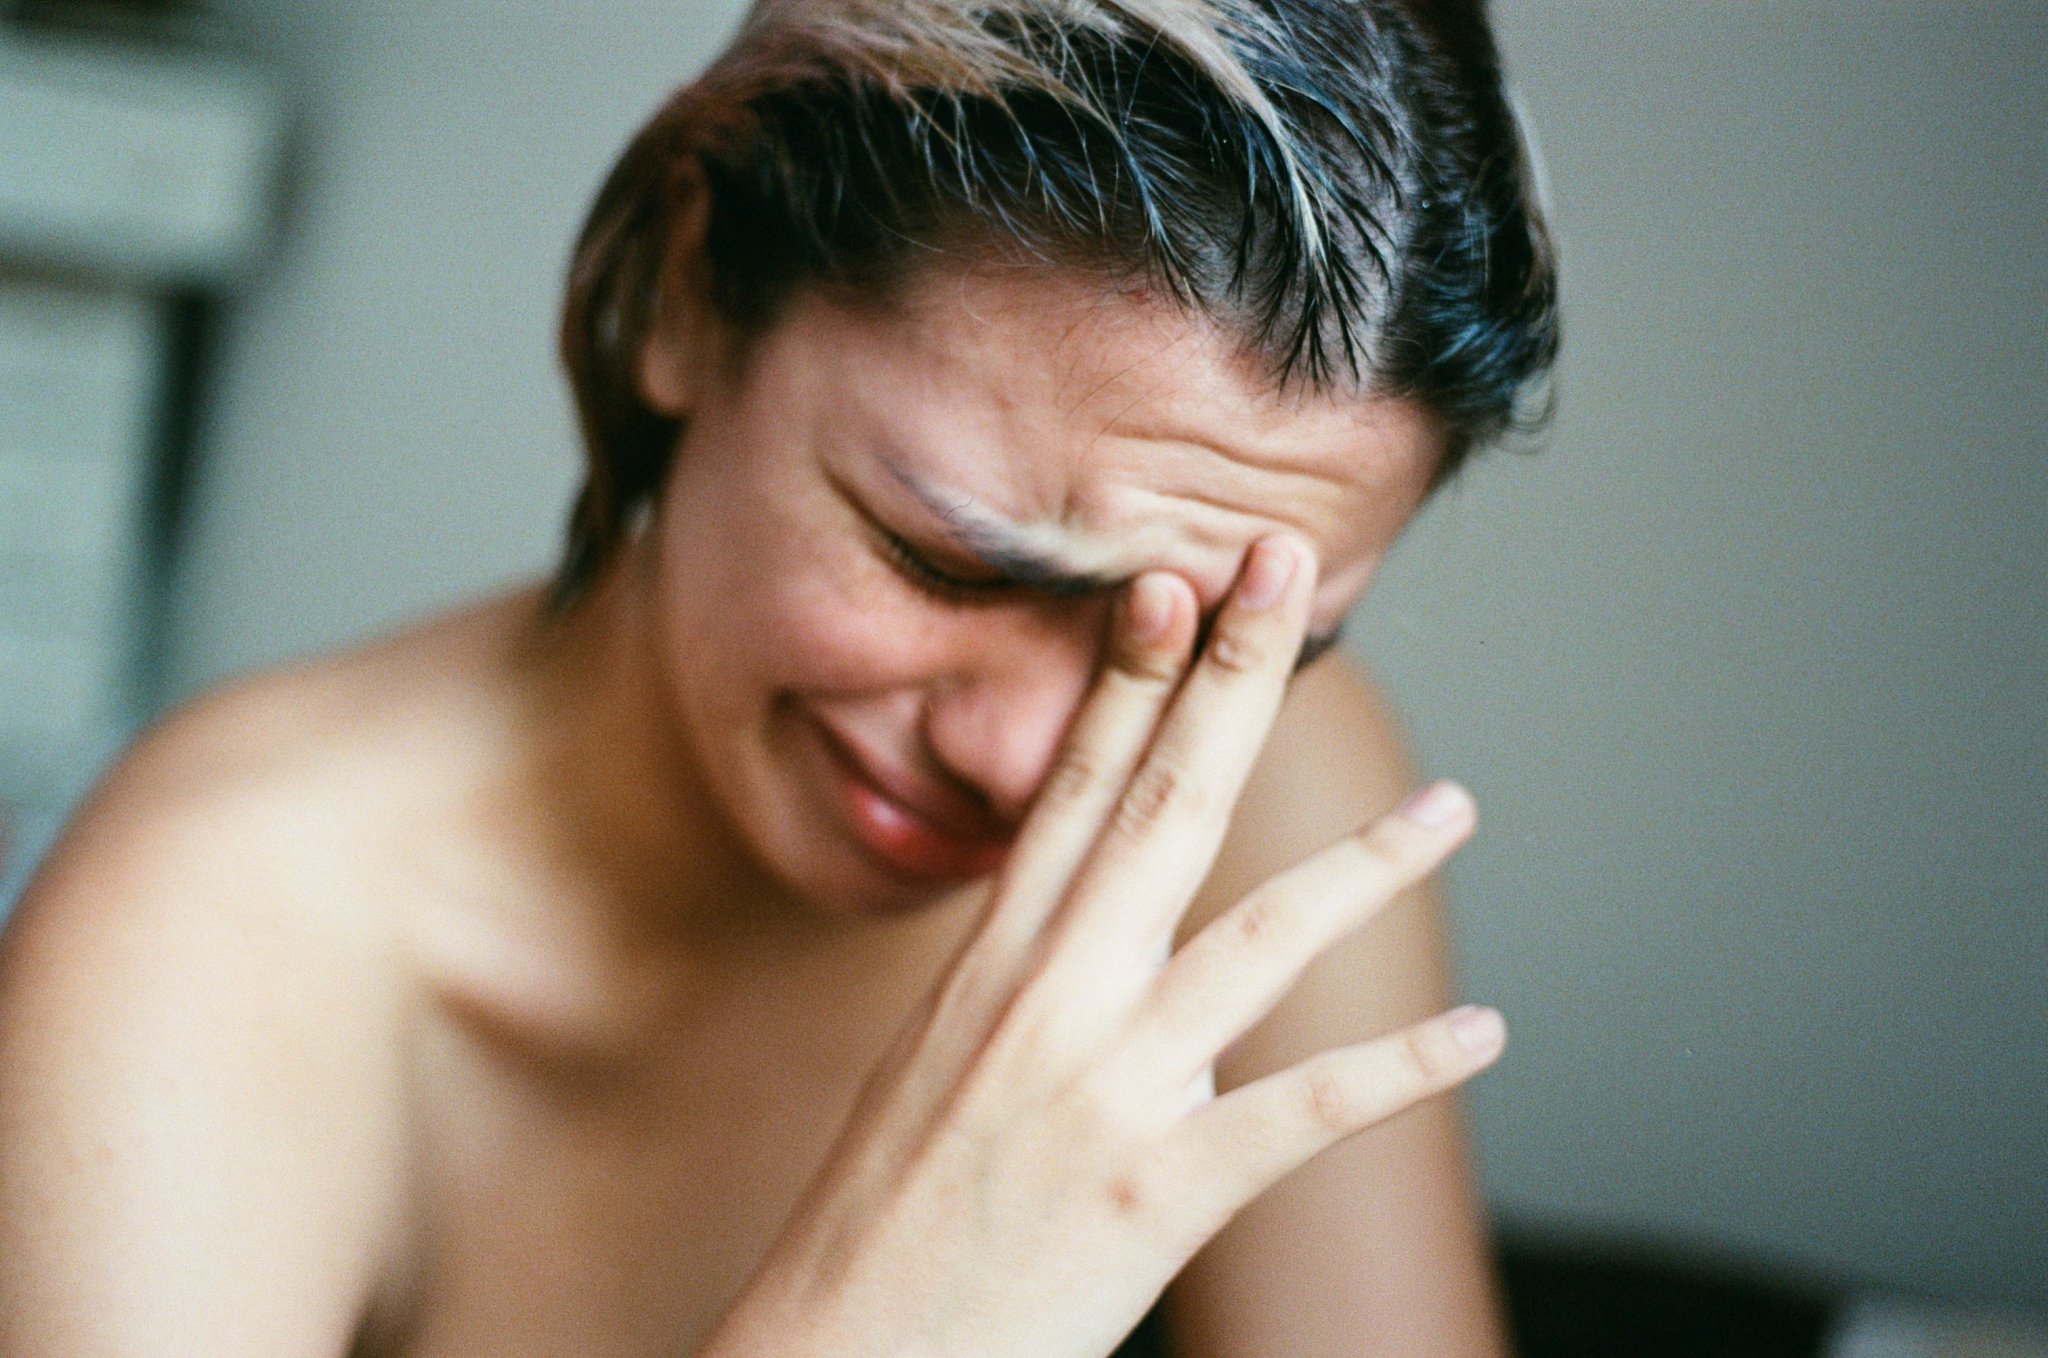 Self-Portraits Set This Film Photographer Free From Emotional Abuse